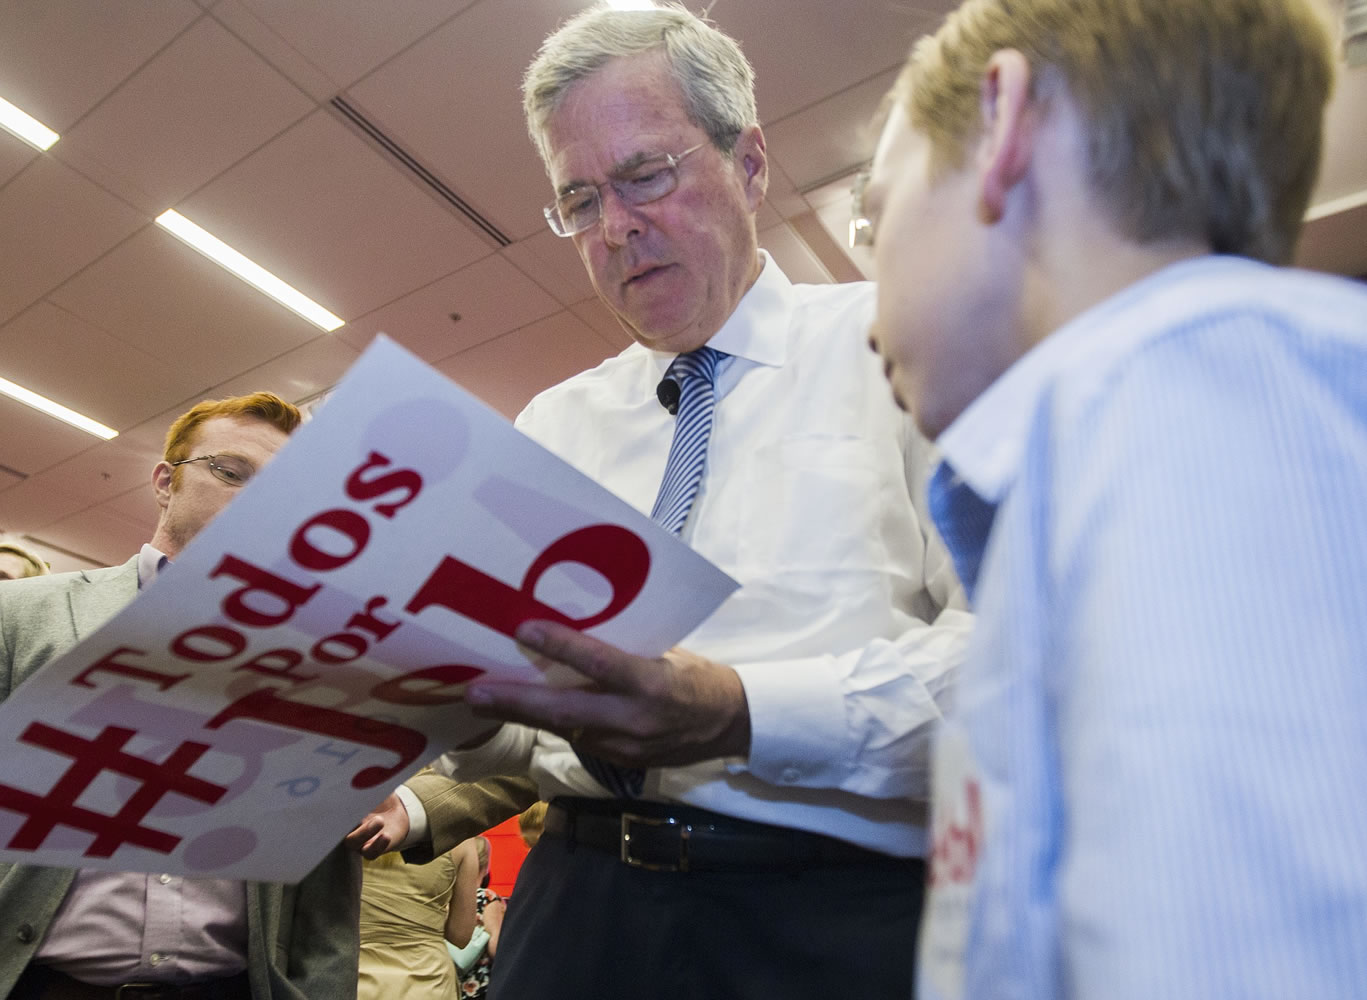 Republican presidential candidate, former Florida Gov. Jeb Bush, autographs campaign literature for a young supporter after speaking at the Florida State University Conference Center in Tallahassee, Fla., Monday, July 20, 2015.